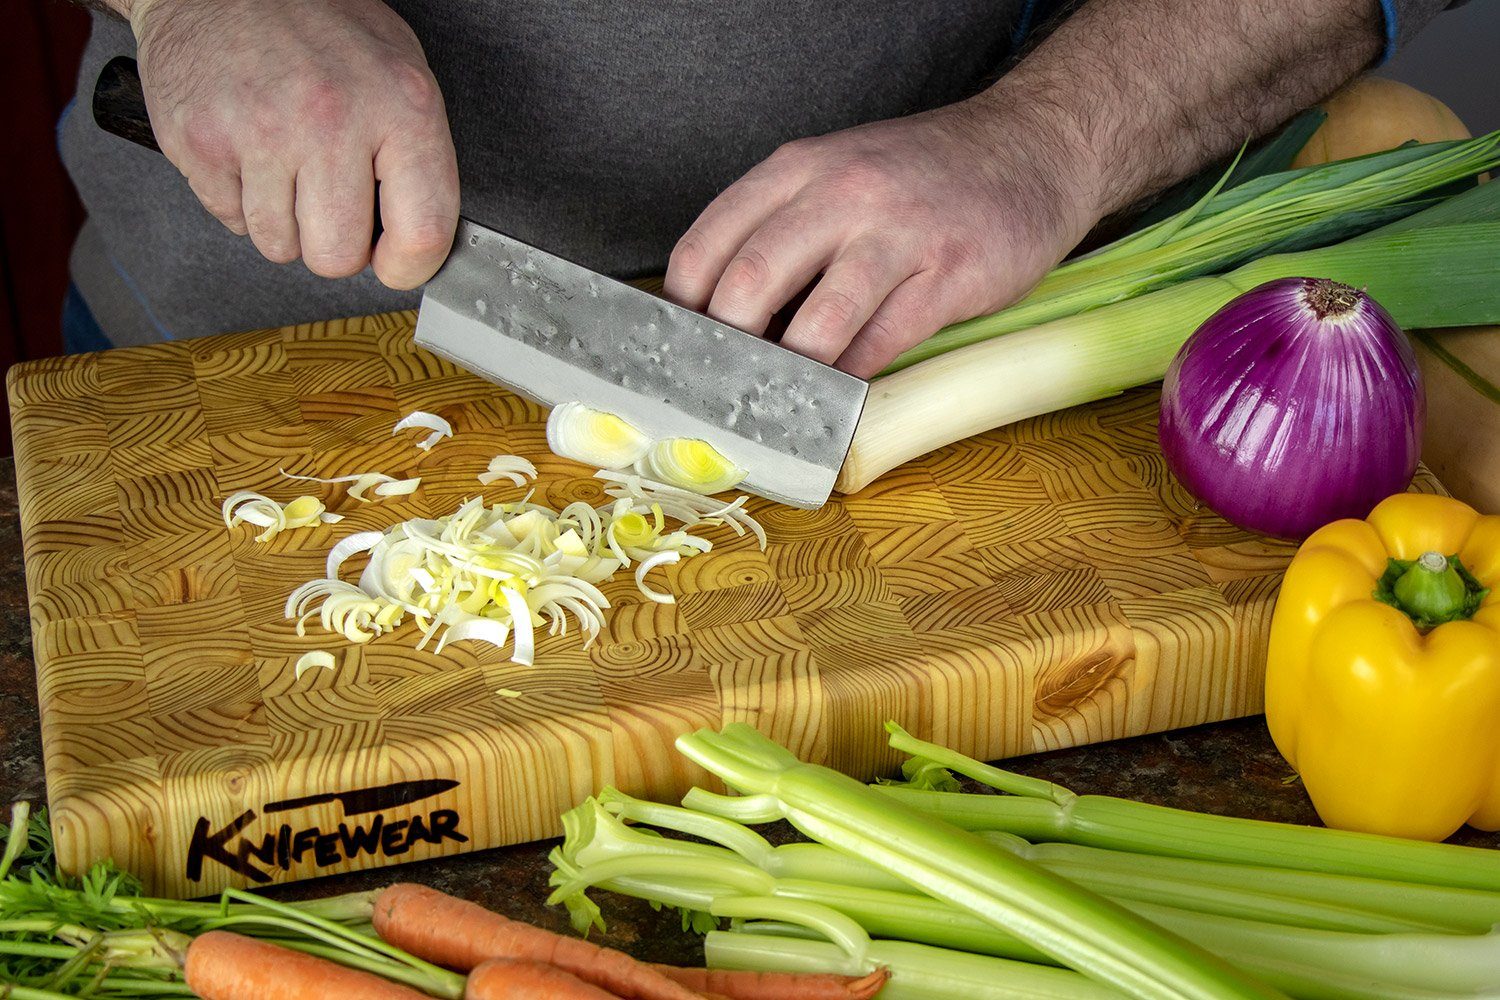 Knife Care: Why Everyone Needs a Larchwood Cutting Board